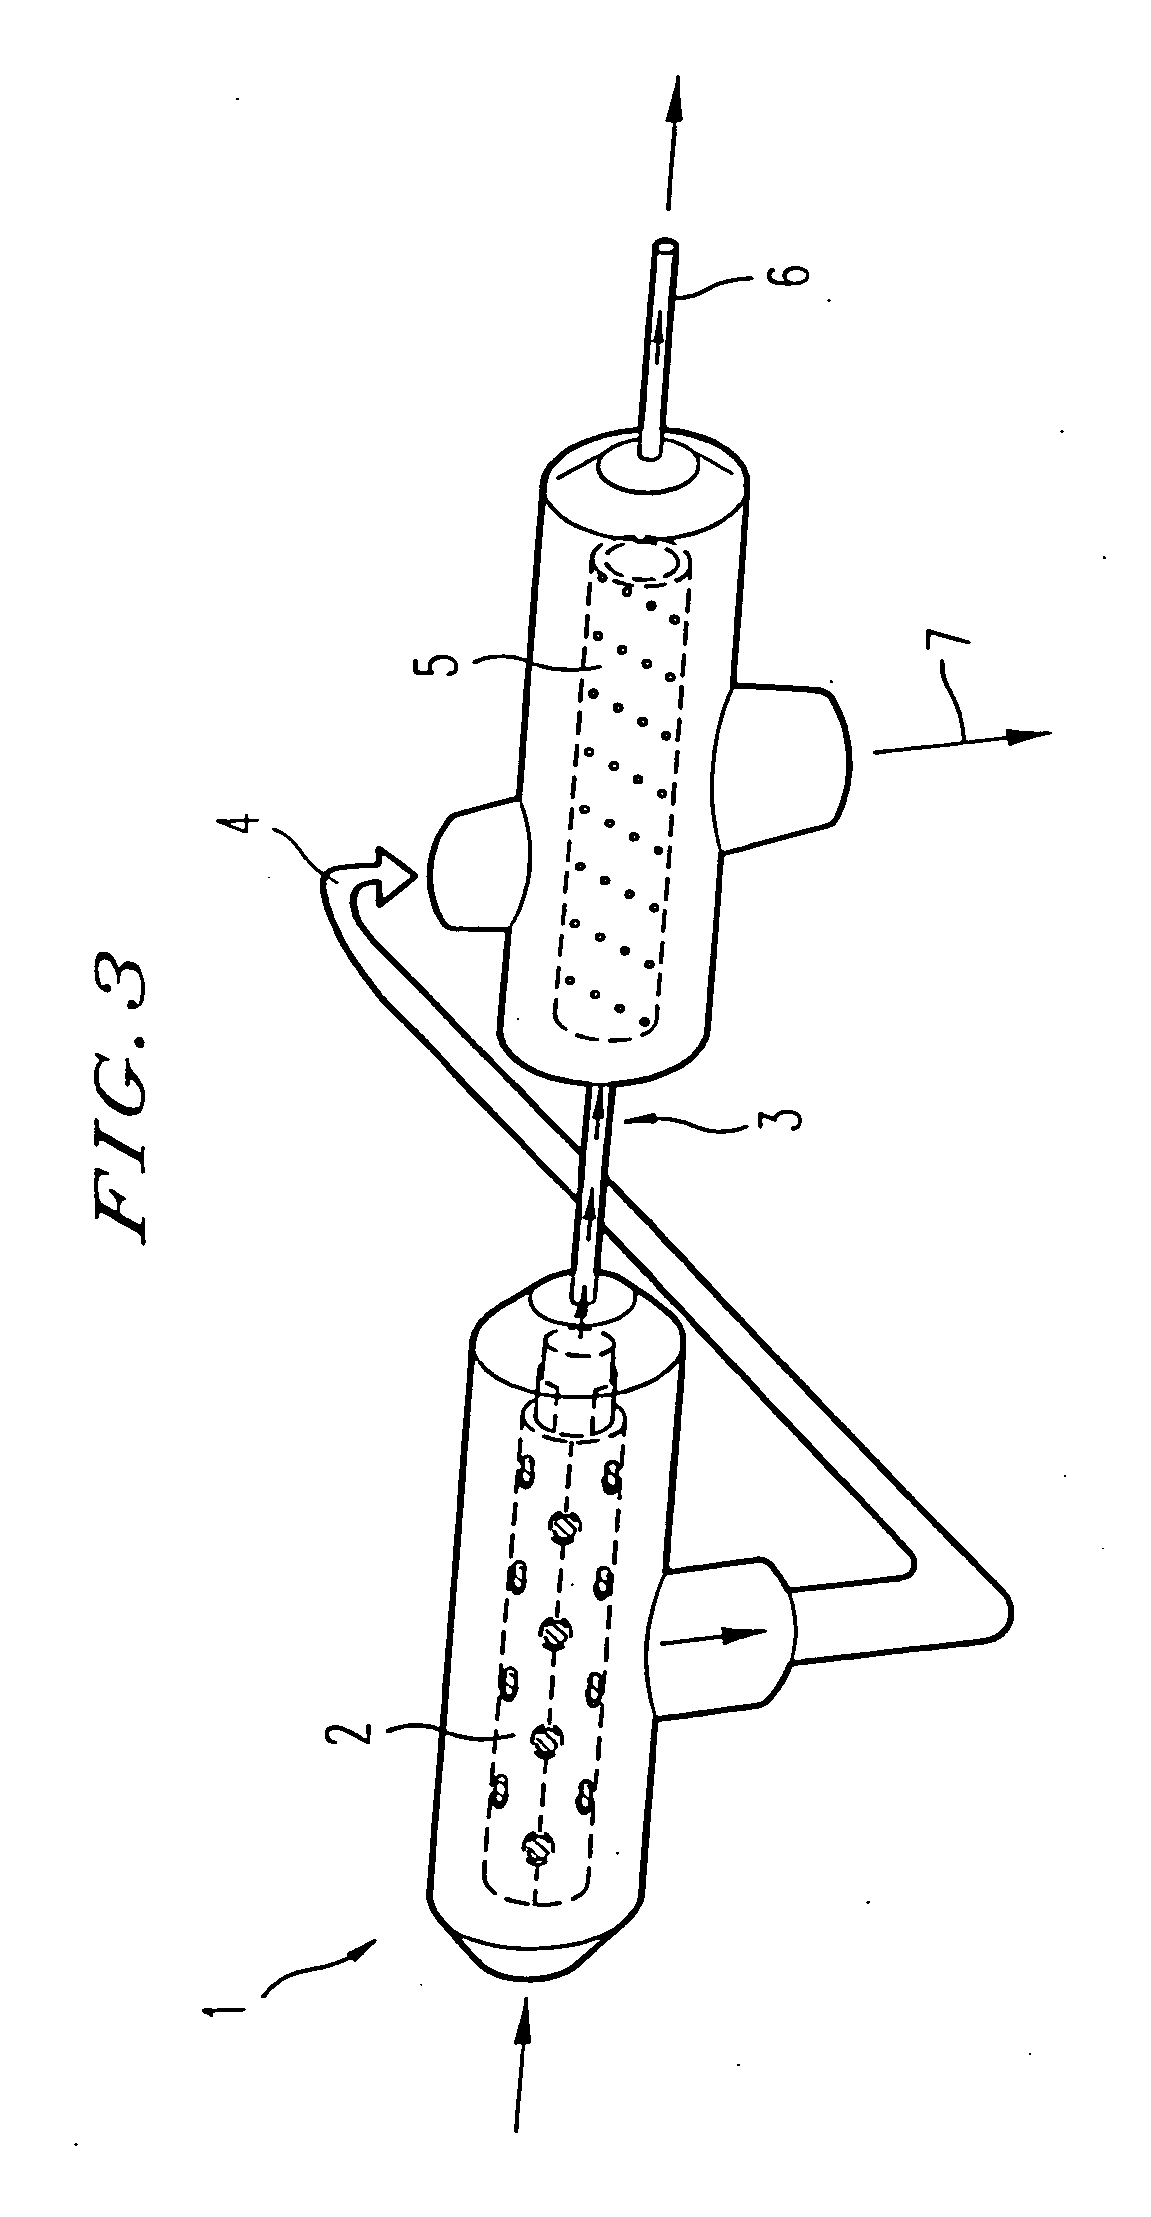 Methods and compositions of bioartificial kidney suitable for use in vivo or ex vivo